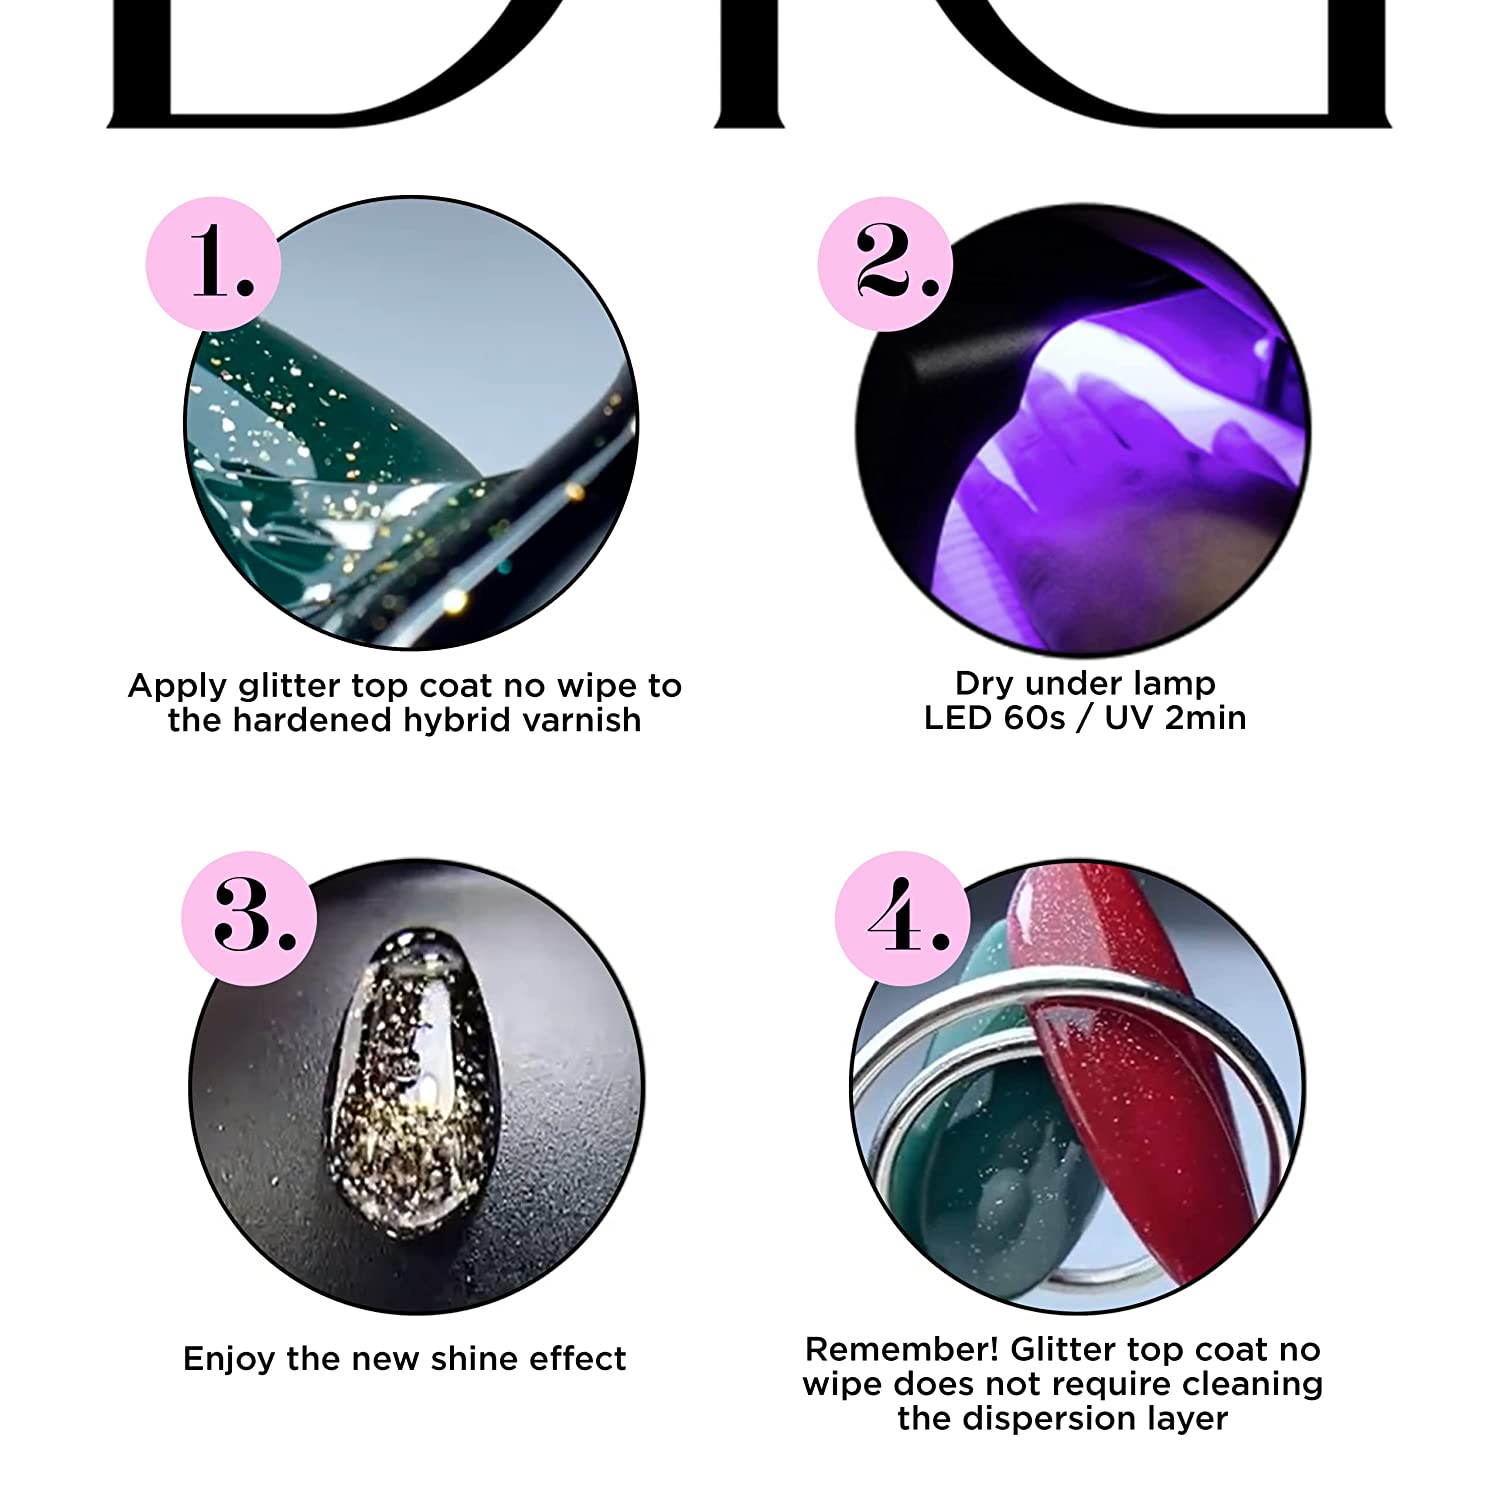 Premium Top Coat Glitter No.1 - Didier Lab - Elite Gel - Protection from Scratches - No Dispersion Layer - Hybrid Varnish - Nail Polish - UV Lamp - Resistance - Durability - Shine - Manicure Pedicure, ‎glitter